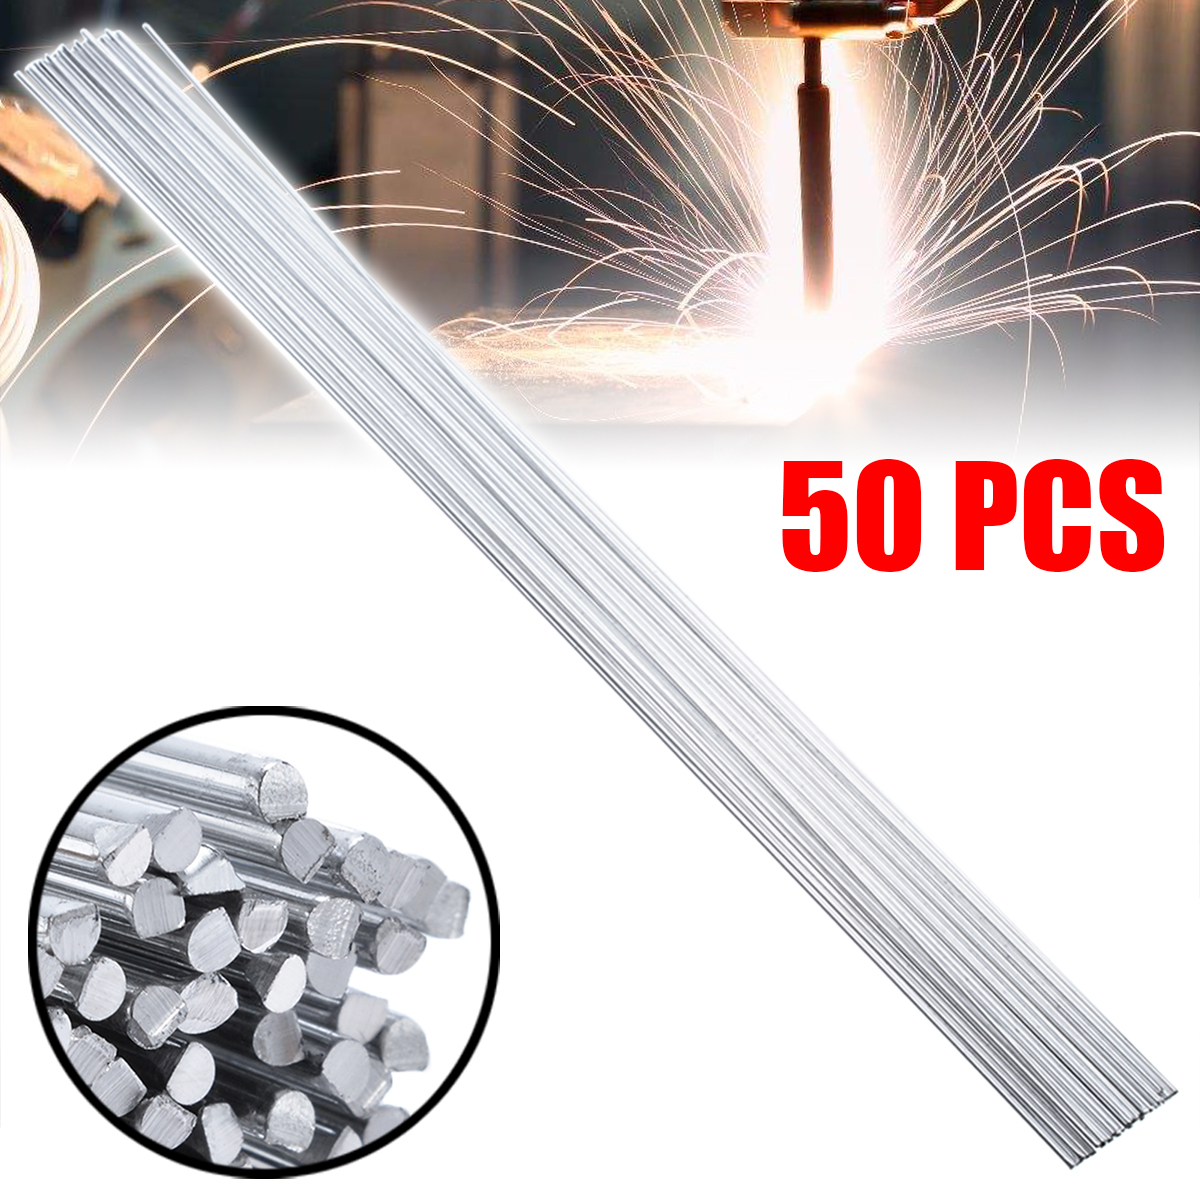 50pcs/lot Easy Aluminum Welding Rods Weld Bars Cored Wire Rod For Soldering Aluminum No Need Solder Powder Low Temperature 1.6mm